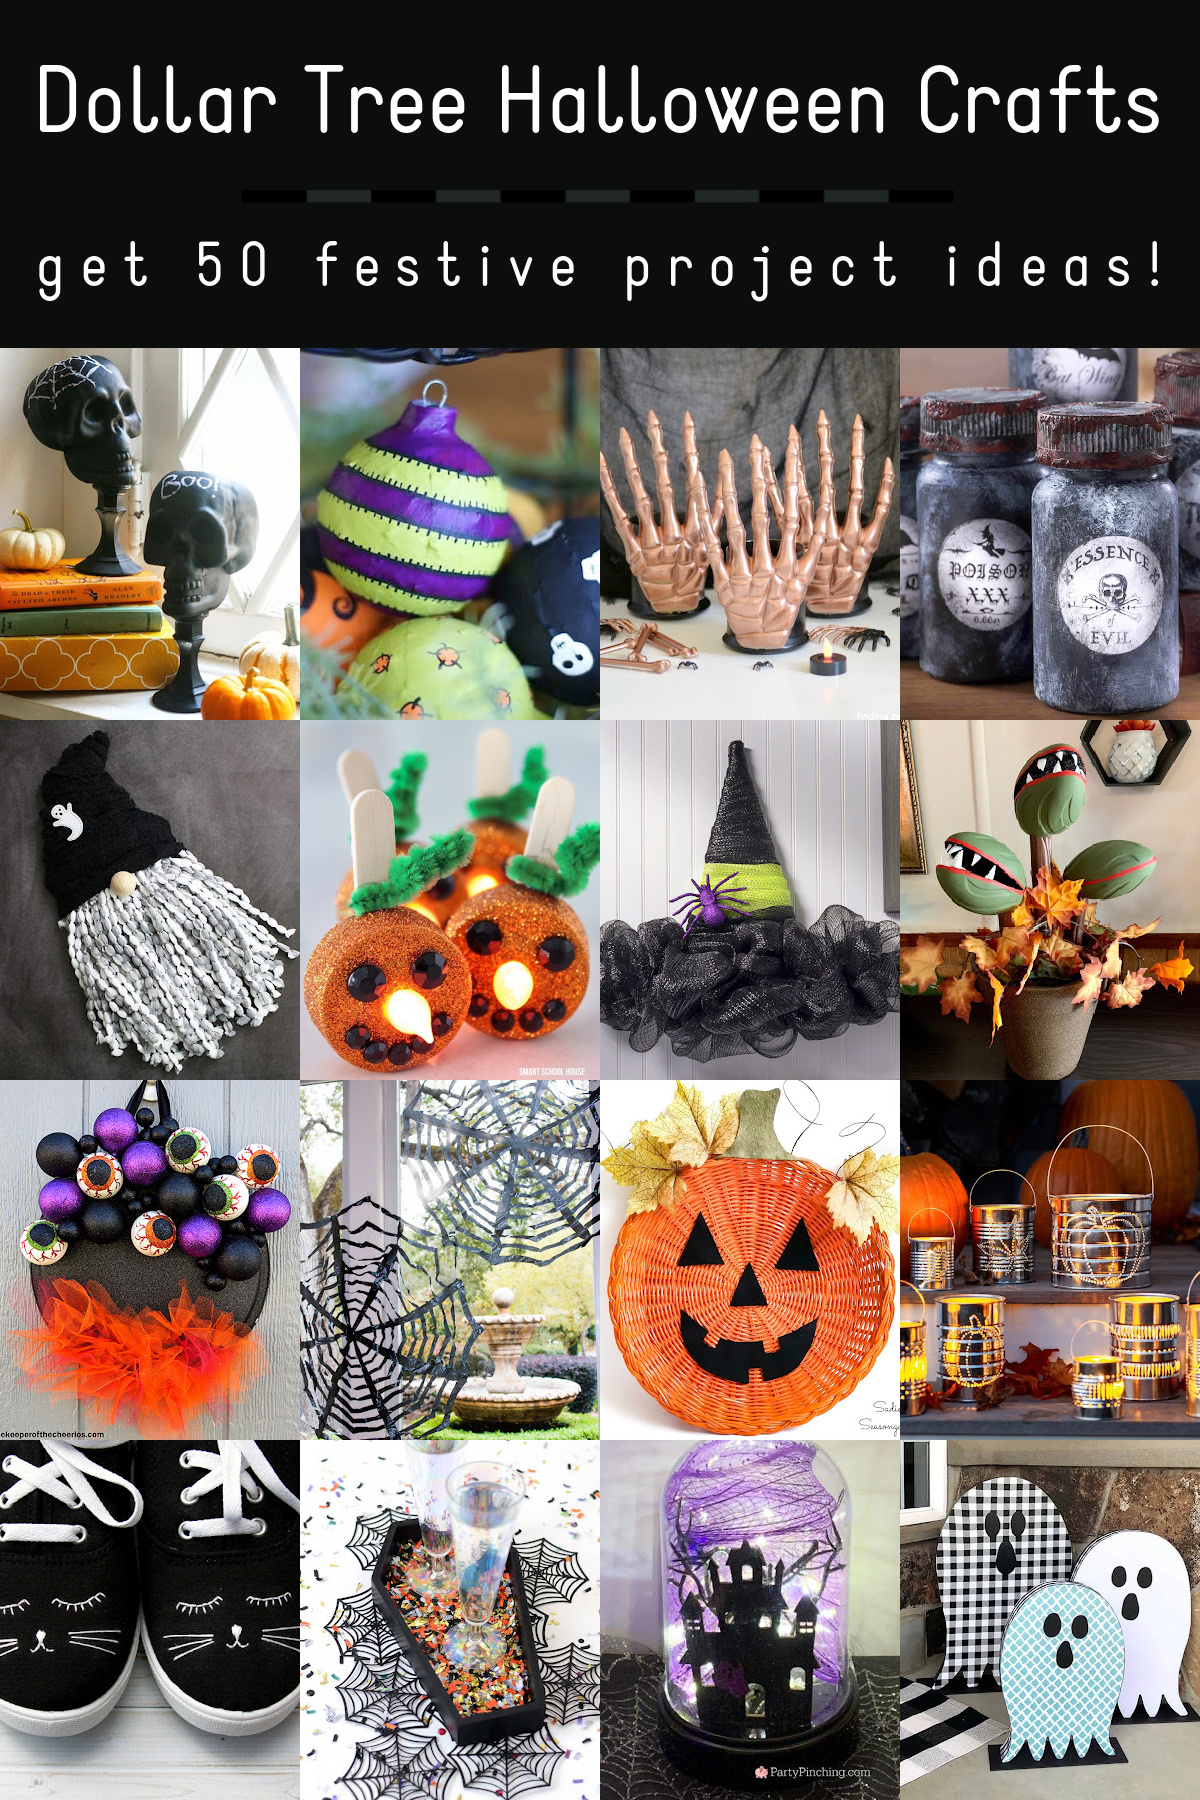 Dollar Tree Halloween Crafts to Try